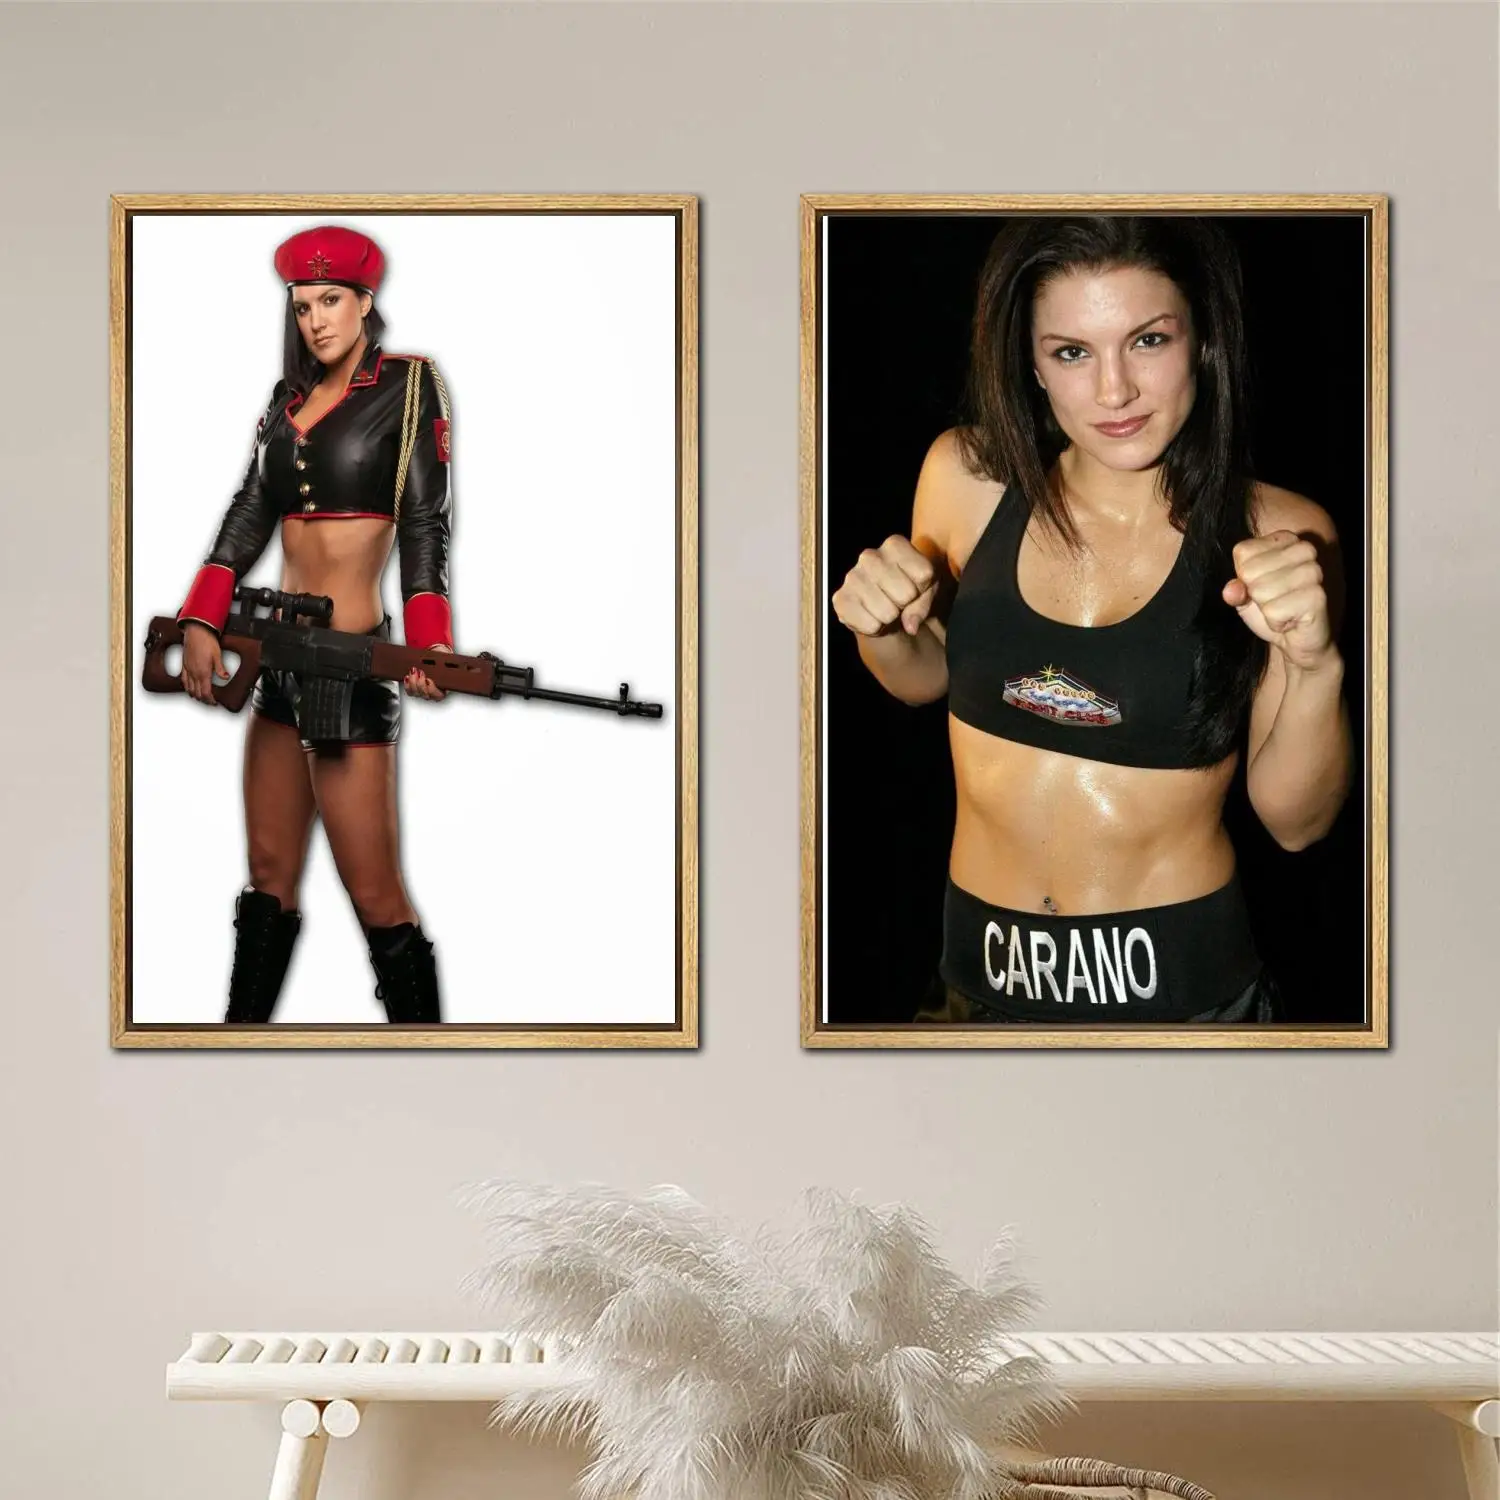 gina carano Poster Painting 24x36 Wall Art Canvas Posters room decor Modern Family bedroom Decoration Art wall decor